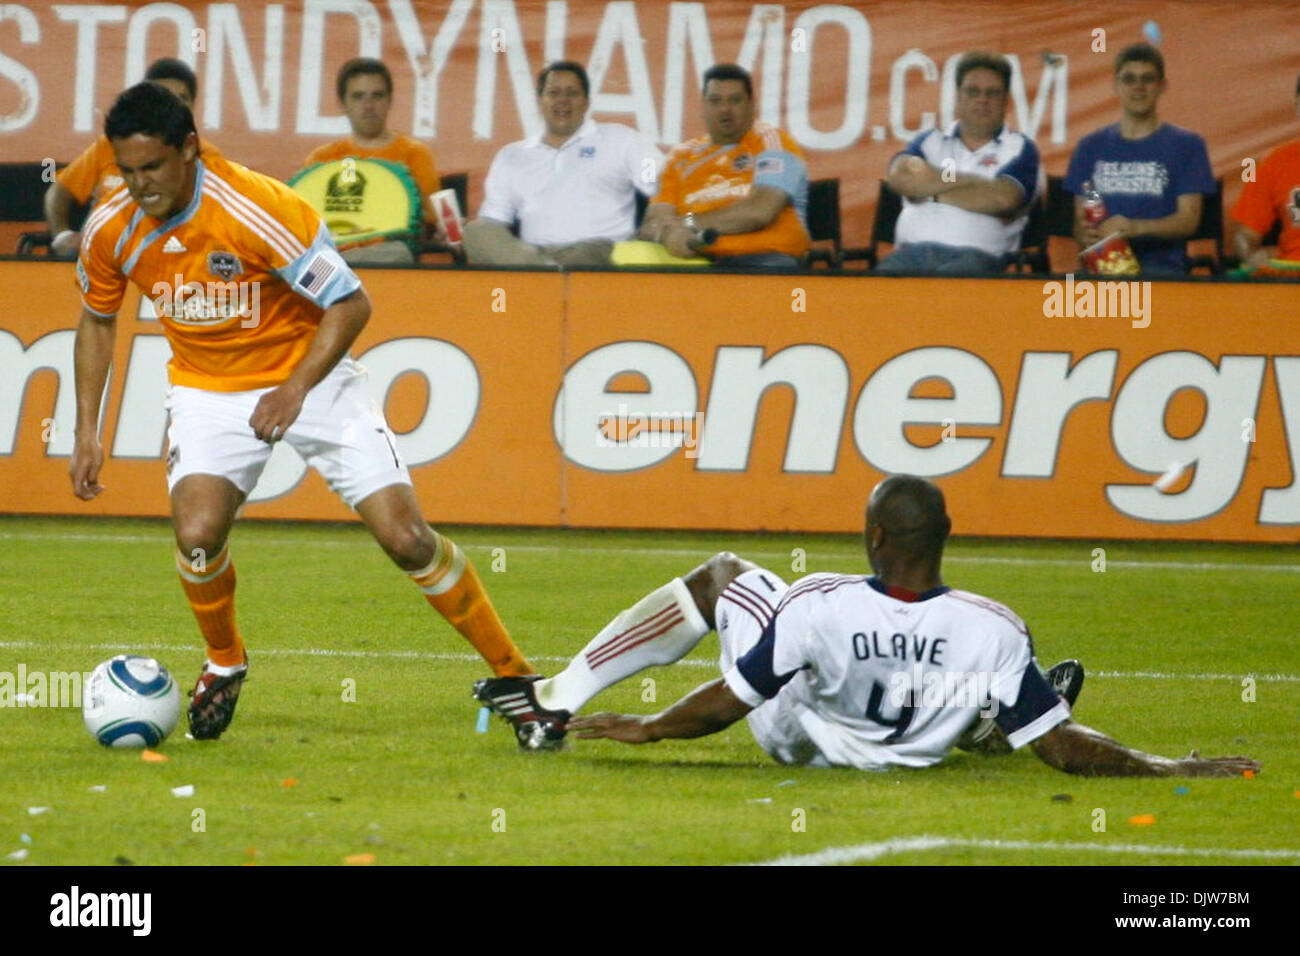 Luis Angel Landin (#7) for the Houston Dynamo is tackled in the penalty box by Jamison Olave (#4) for the Real Salt Lake resulting in the game winning kick. With two